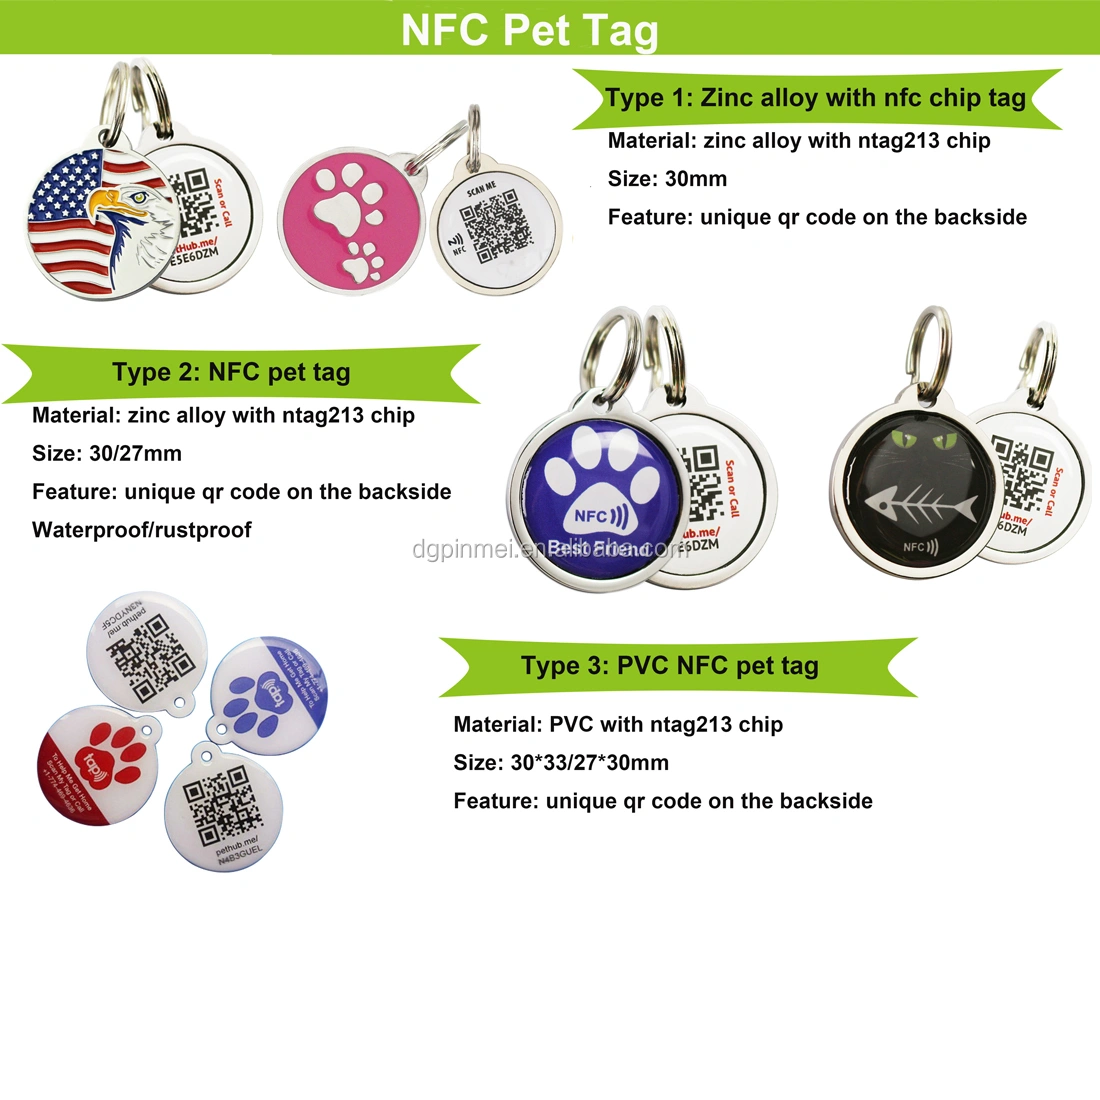 Micro NFC pet tag with qr code NFC pet tracking dog tag RFID NFC tag